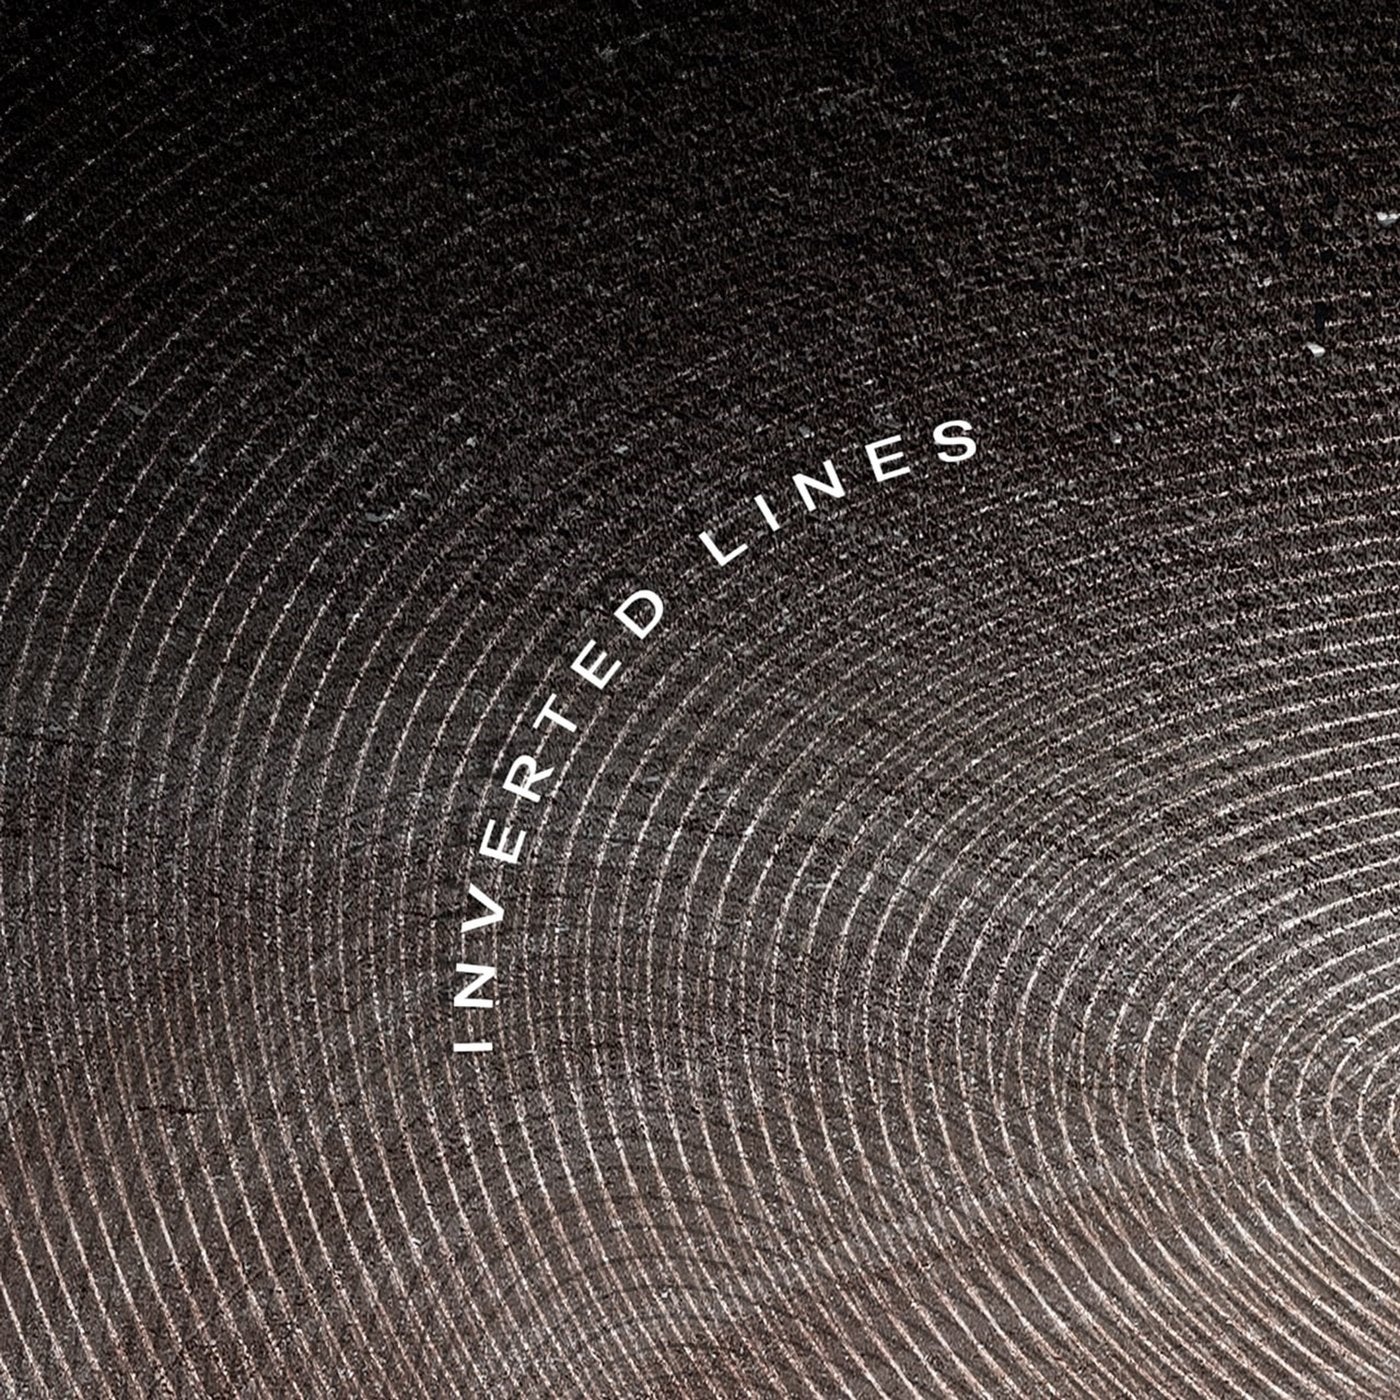 Inverted Lines